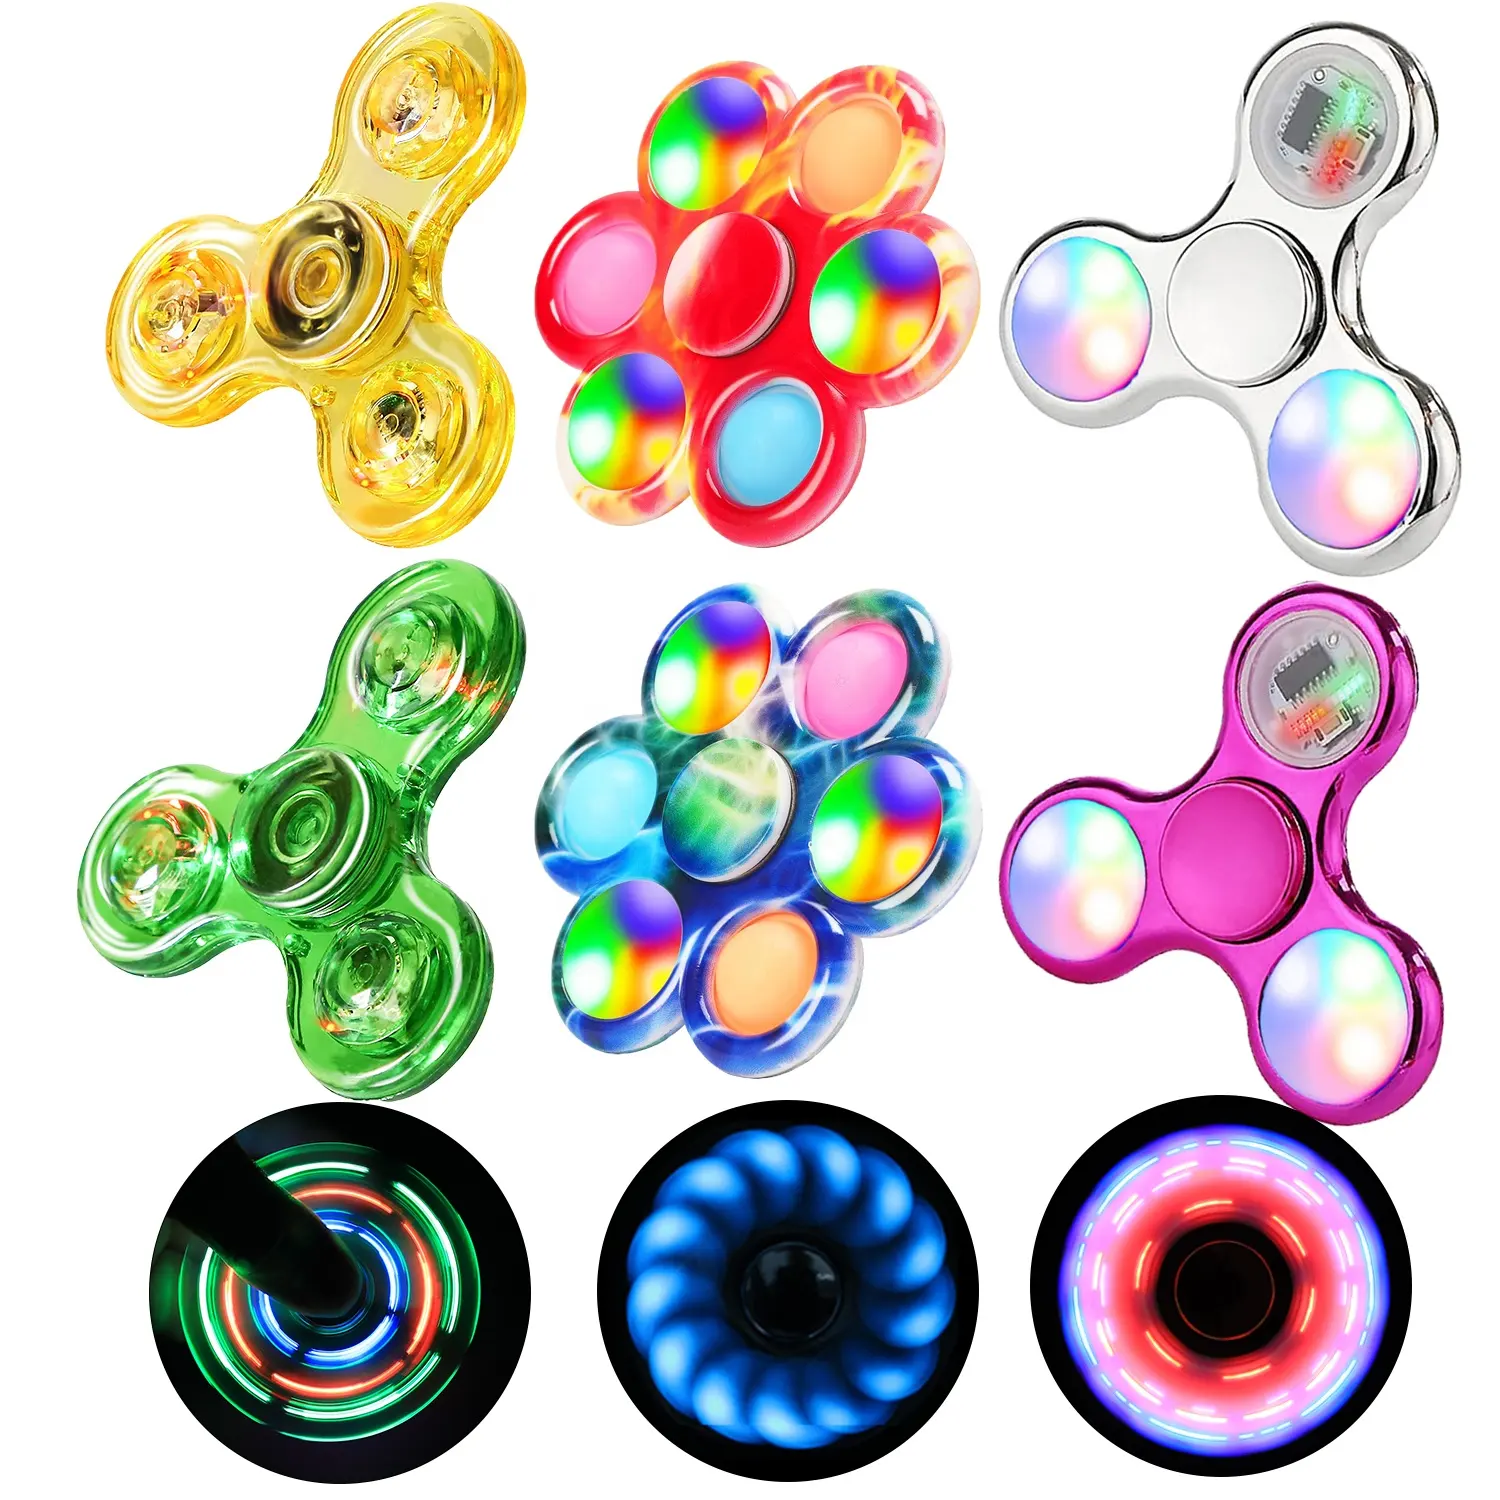 Wholesale 10x LED Light Flash Hand Spinner Fidget EDC Toy Autism On/off 3 Mode for sale online 